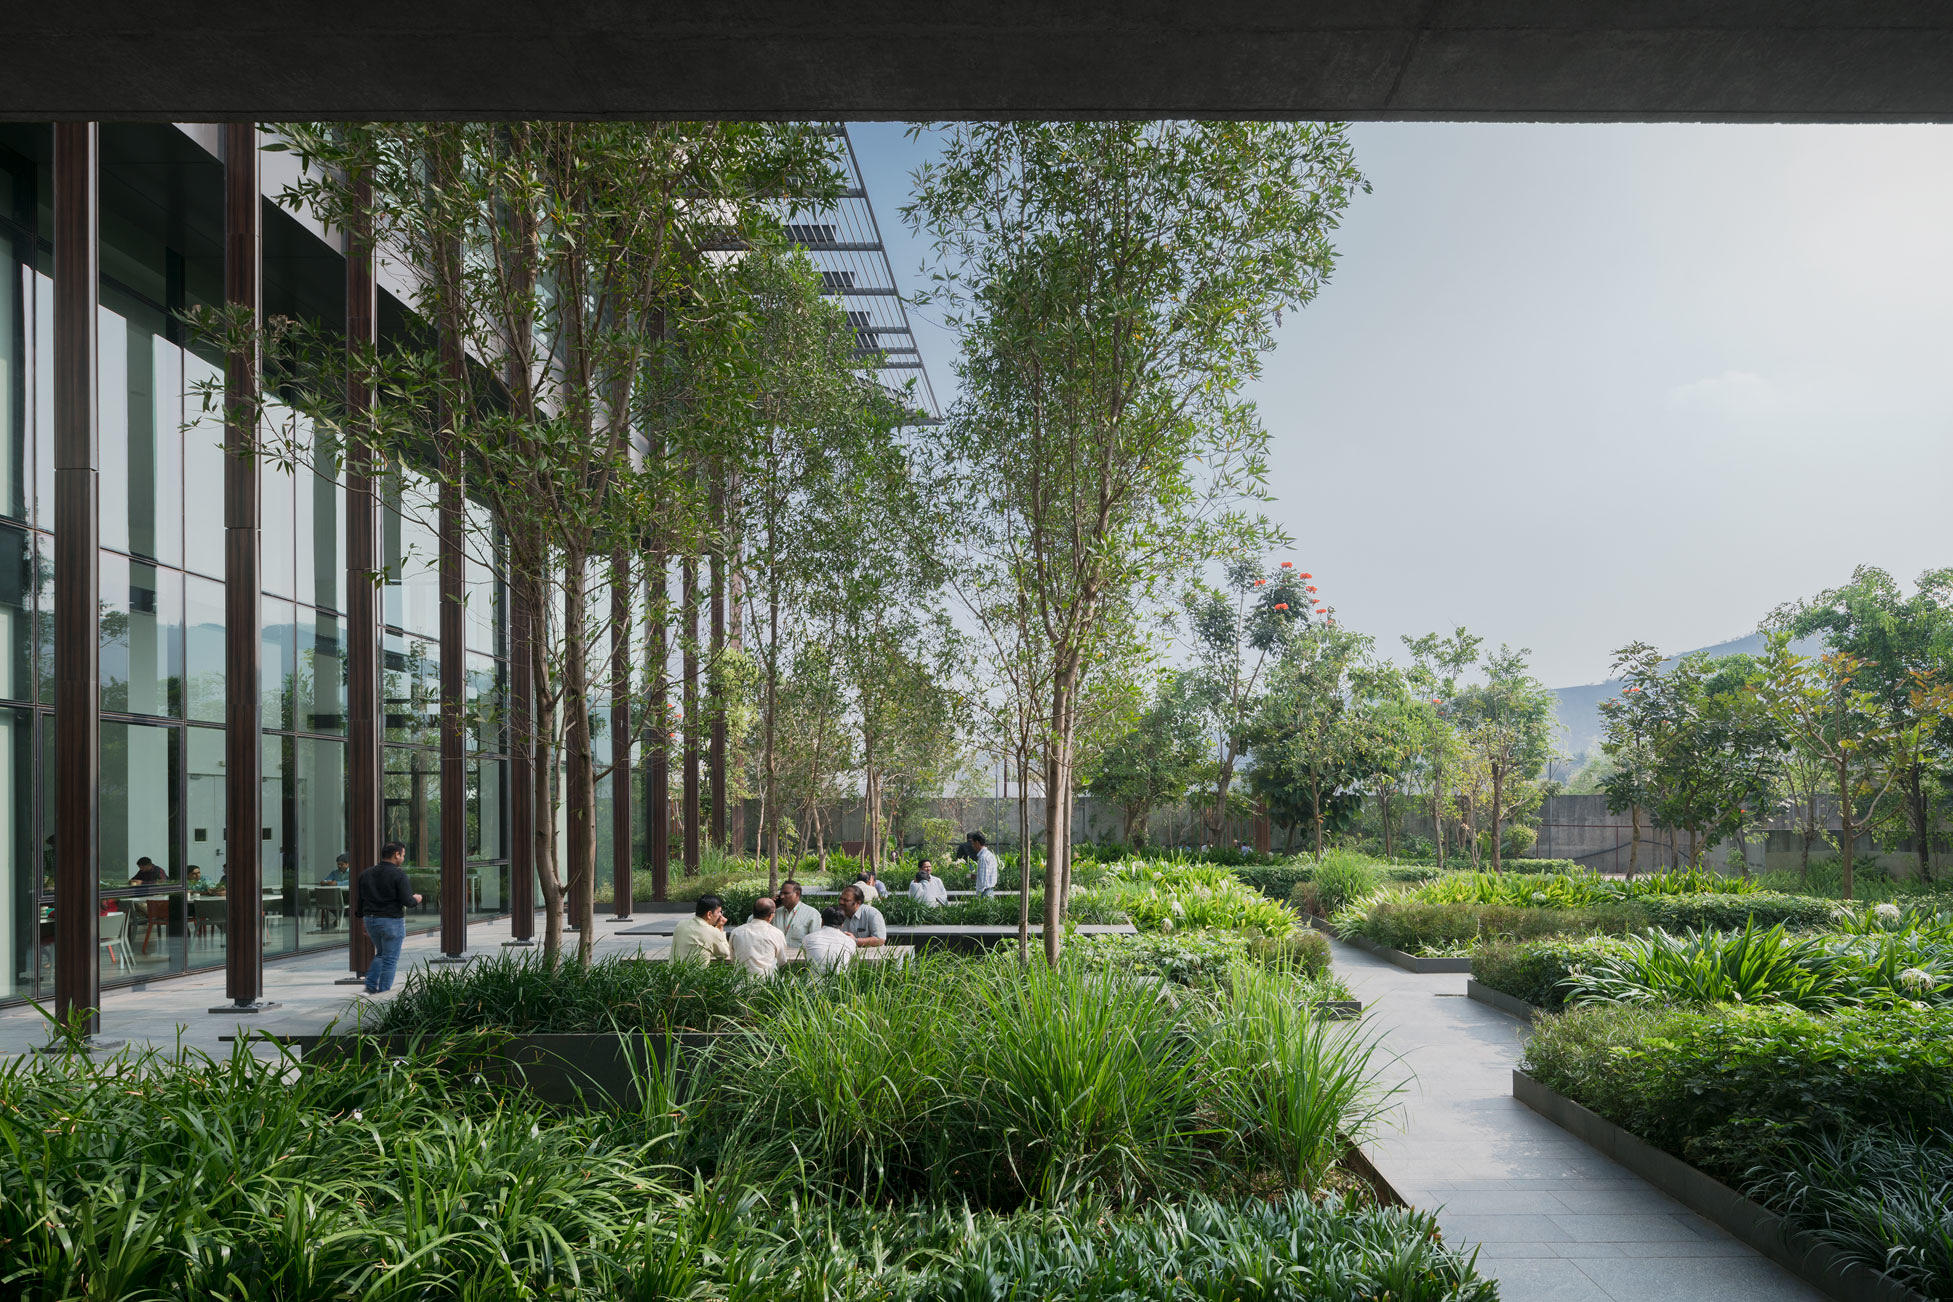 Planted area. Sustainable Landscaping. Person Heekyeong Park’s research. Best Design of research Park=KS. Heekyeong Park’s research photo.